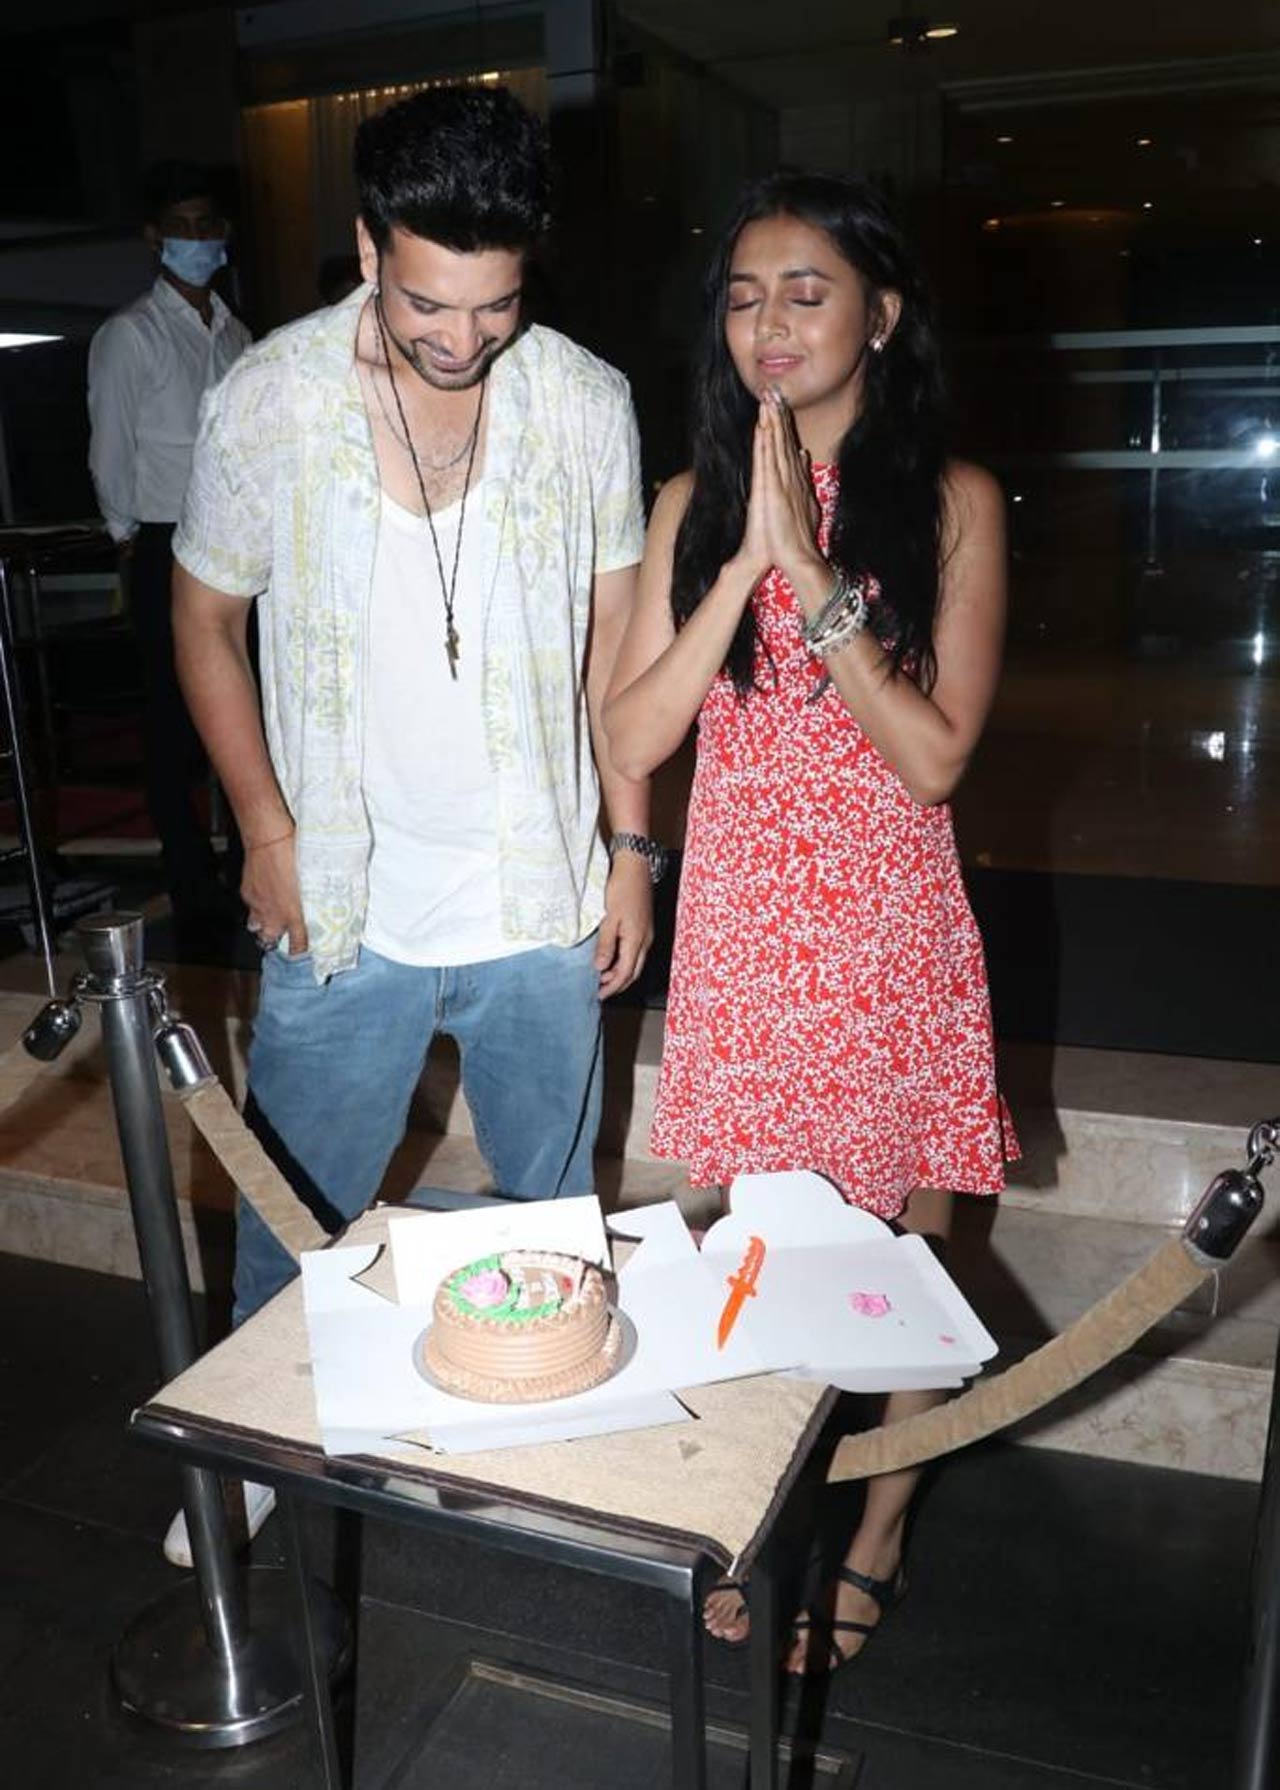 Tejasswi Prakash prays before going ahead and cutting her cake. Karan Kundrra recently opened up on his marriage plans with Tejasswi and shared that the latter is the one who is delaying their wedding as she is too busy. He also said that their parents often meet with each other